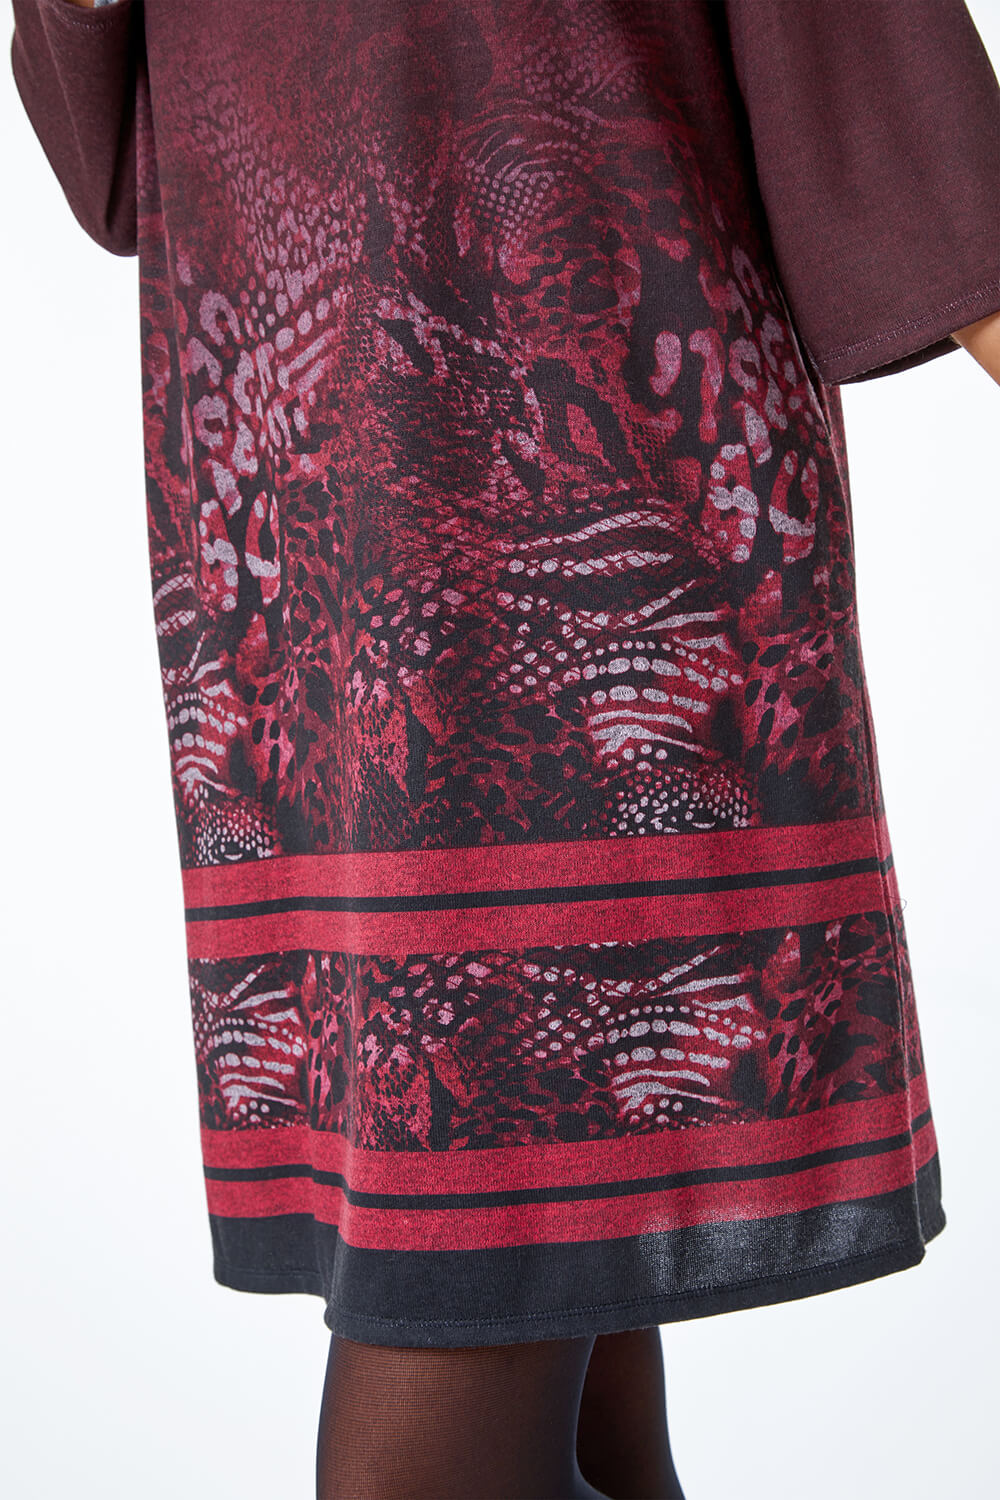 Wine Relaxed Fit Ombre Animal Print Dress, Image 5 of 5